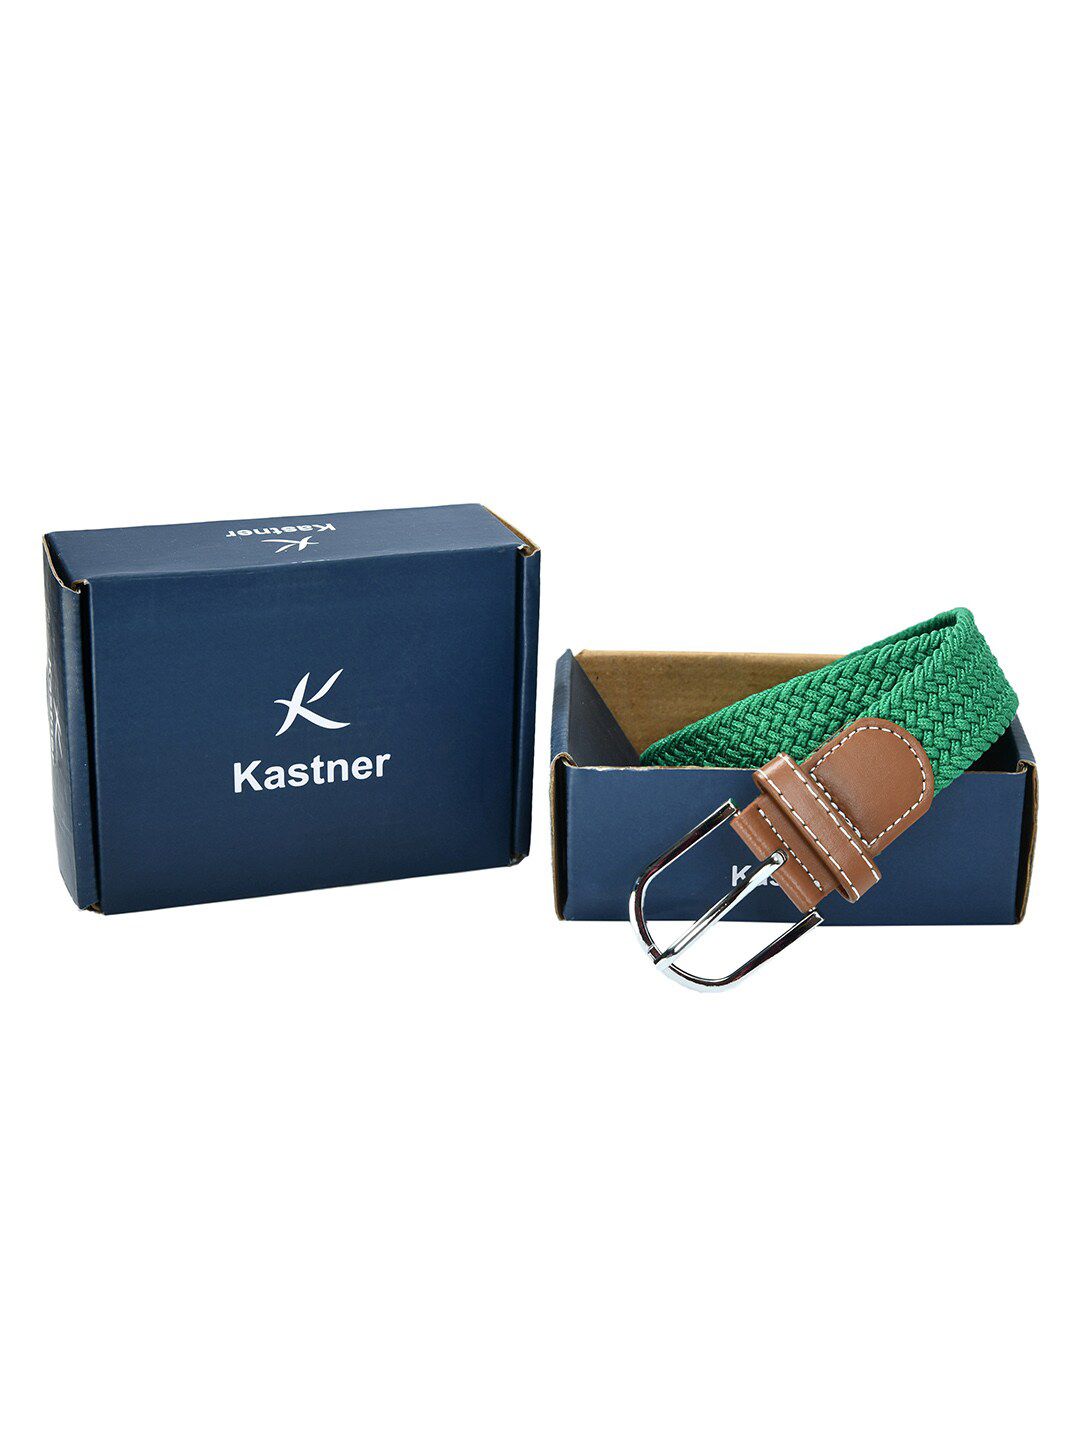 Kastner Unisex Green Braided Stretchable Belt Price in India